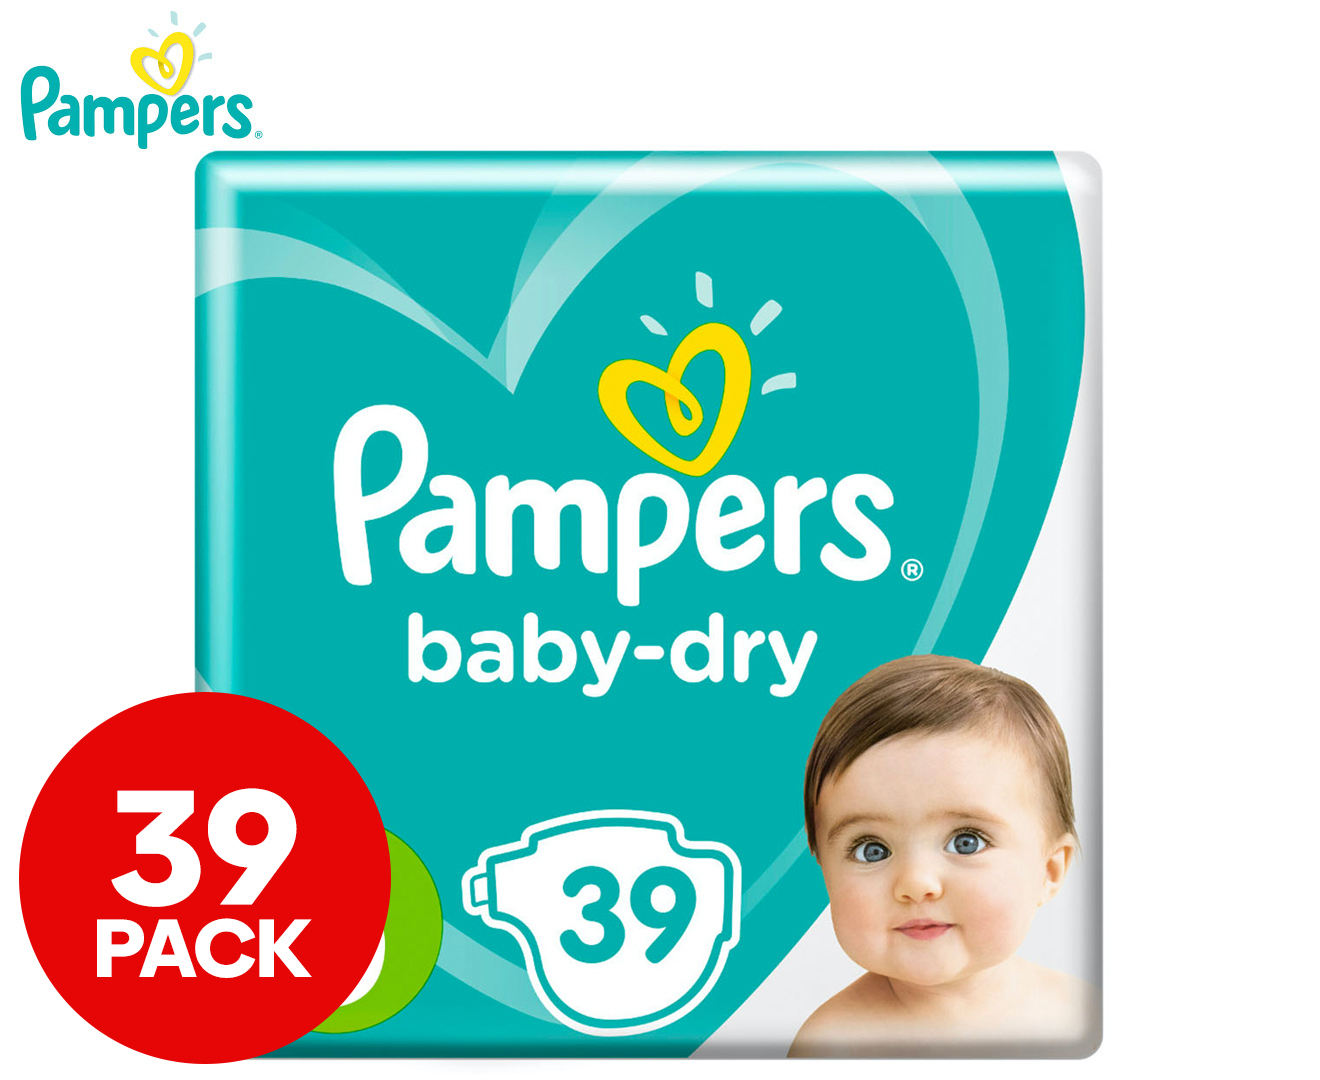 Compatible with Lumi Sleep System 29 Count Lumi by Pampers Size 2 Diapers Sold Separately Jumbo 